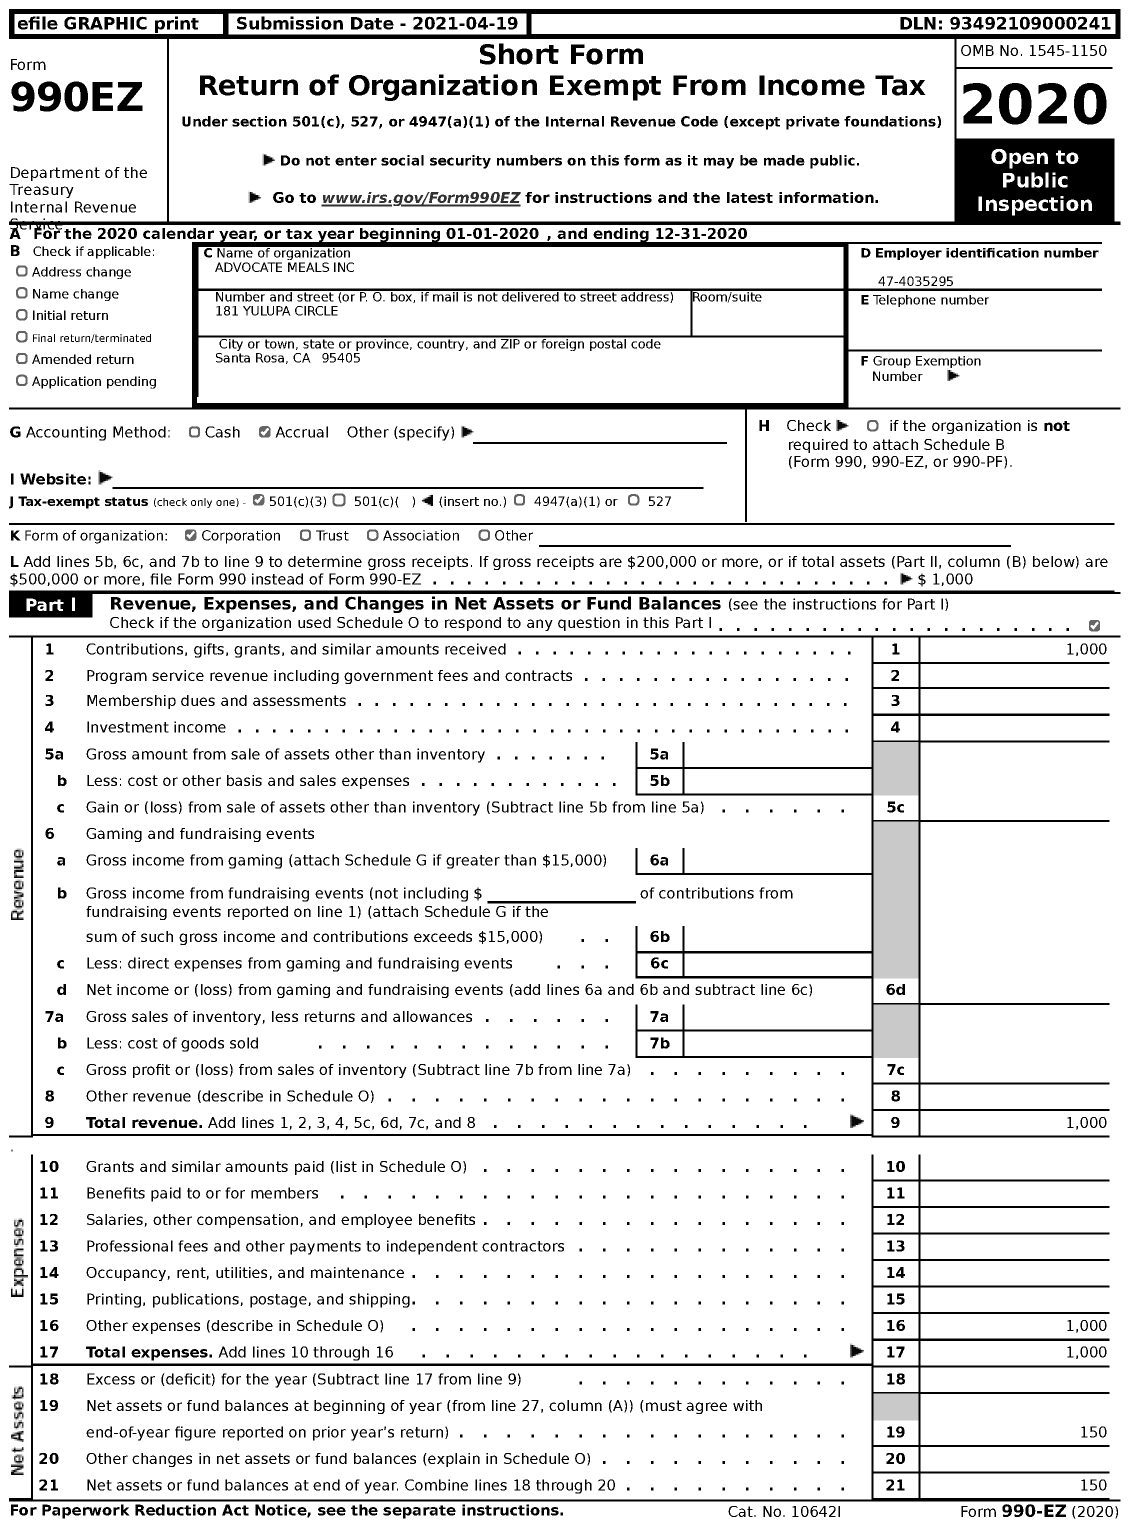 Image of first page of 2020 Form 990EZ for Advocate Meals